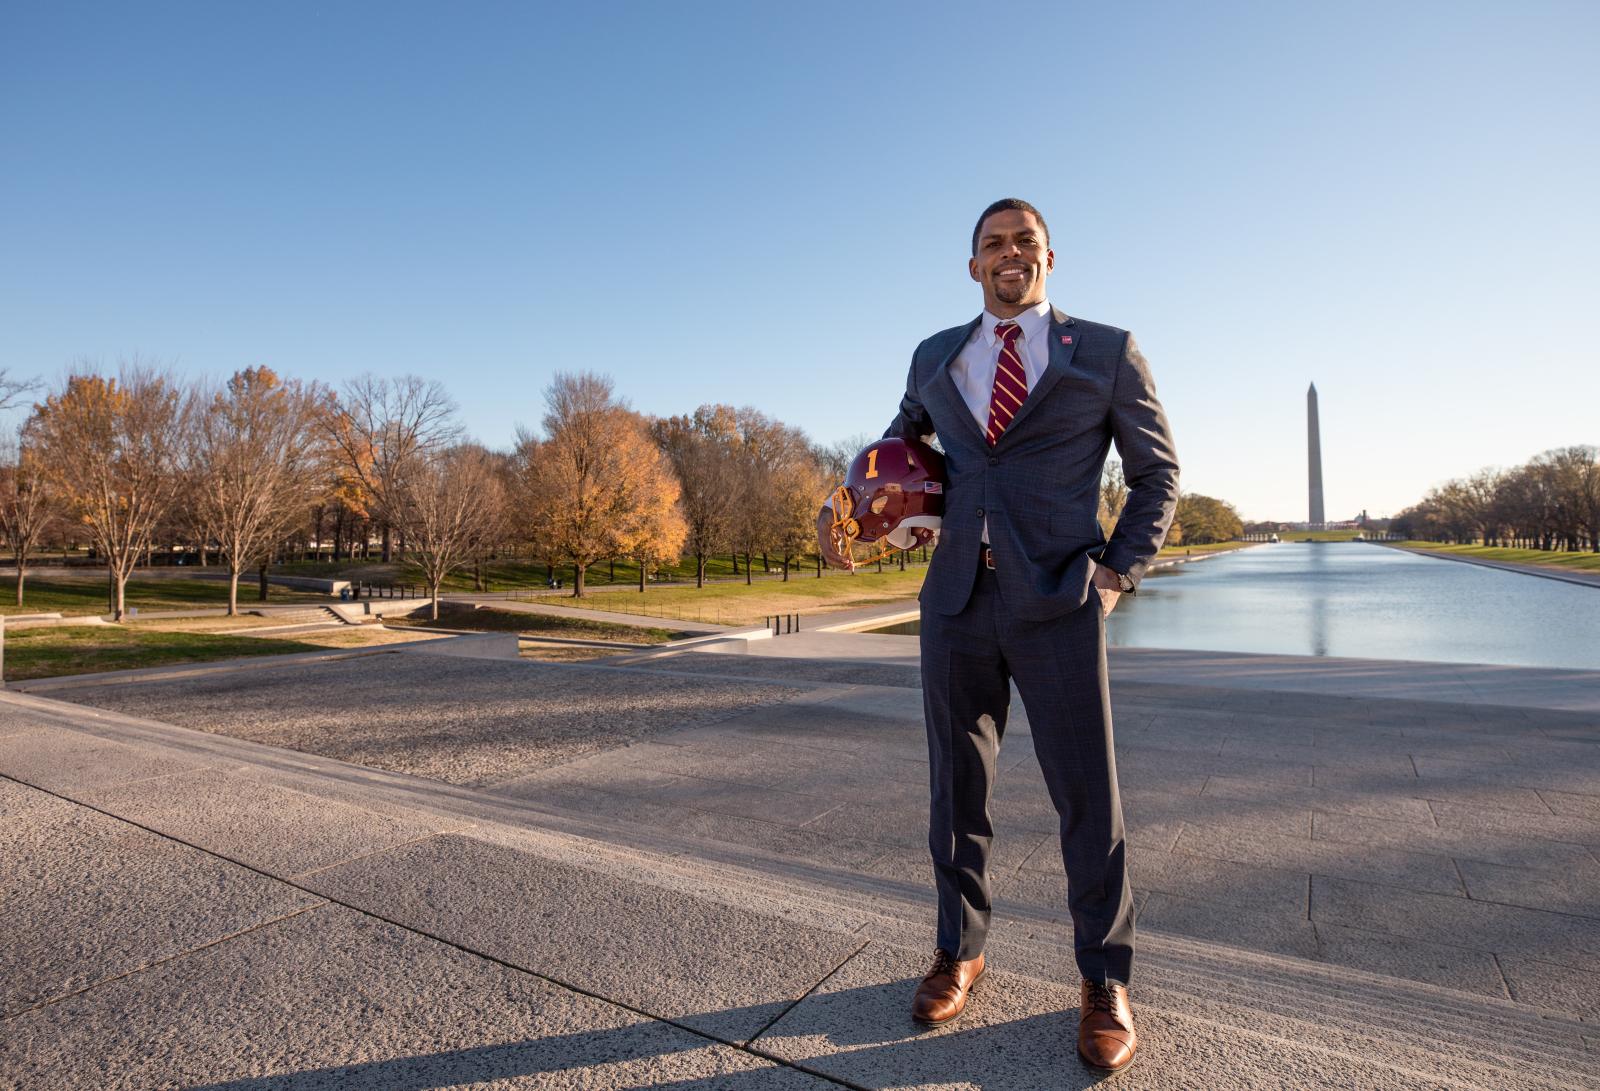 Jason Gomillion Wright, President Of The Washington Football Team of the National Football League posing for a portrait in front of Lincoln memorial in Washington, D.C. 